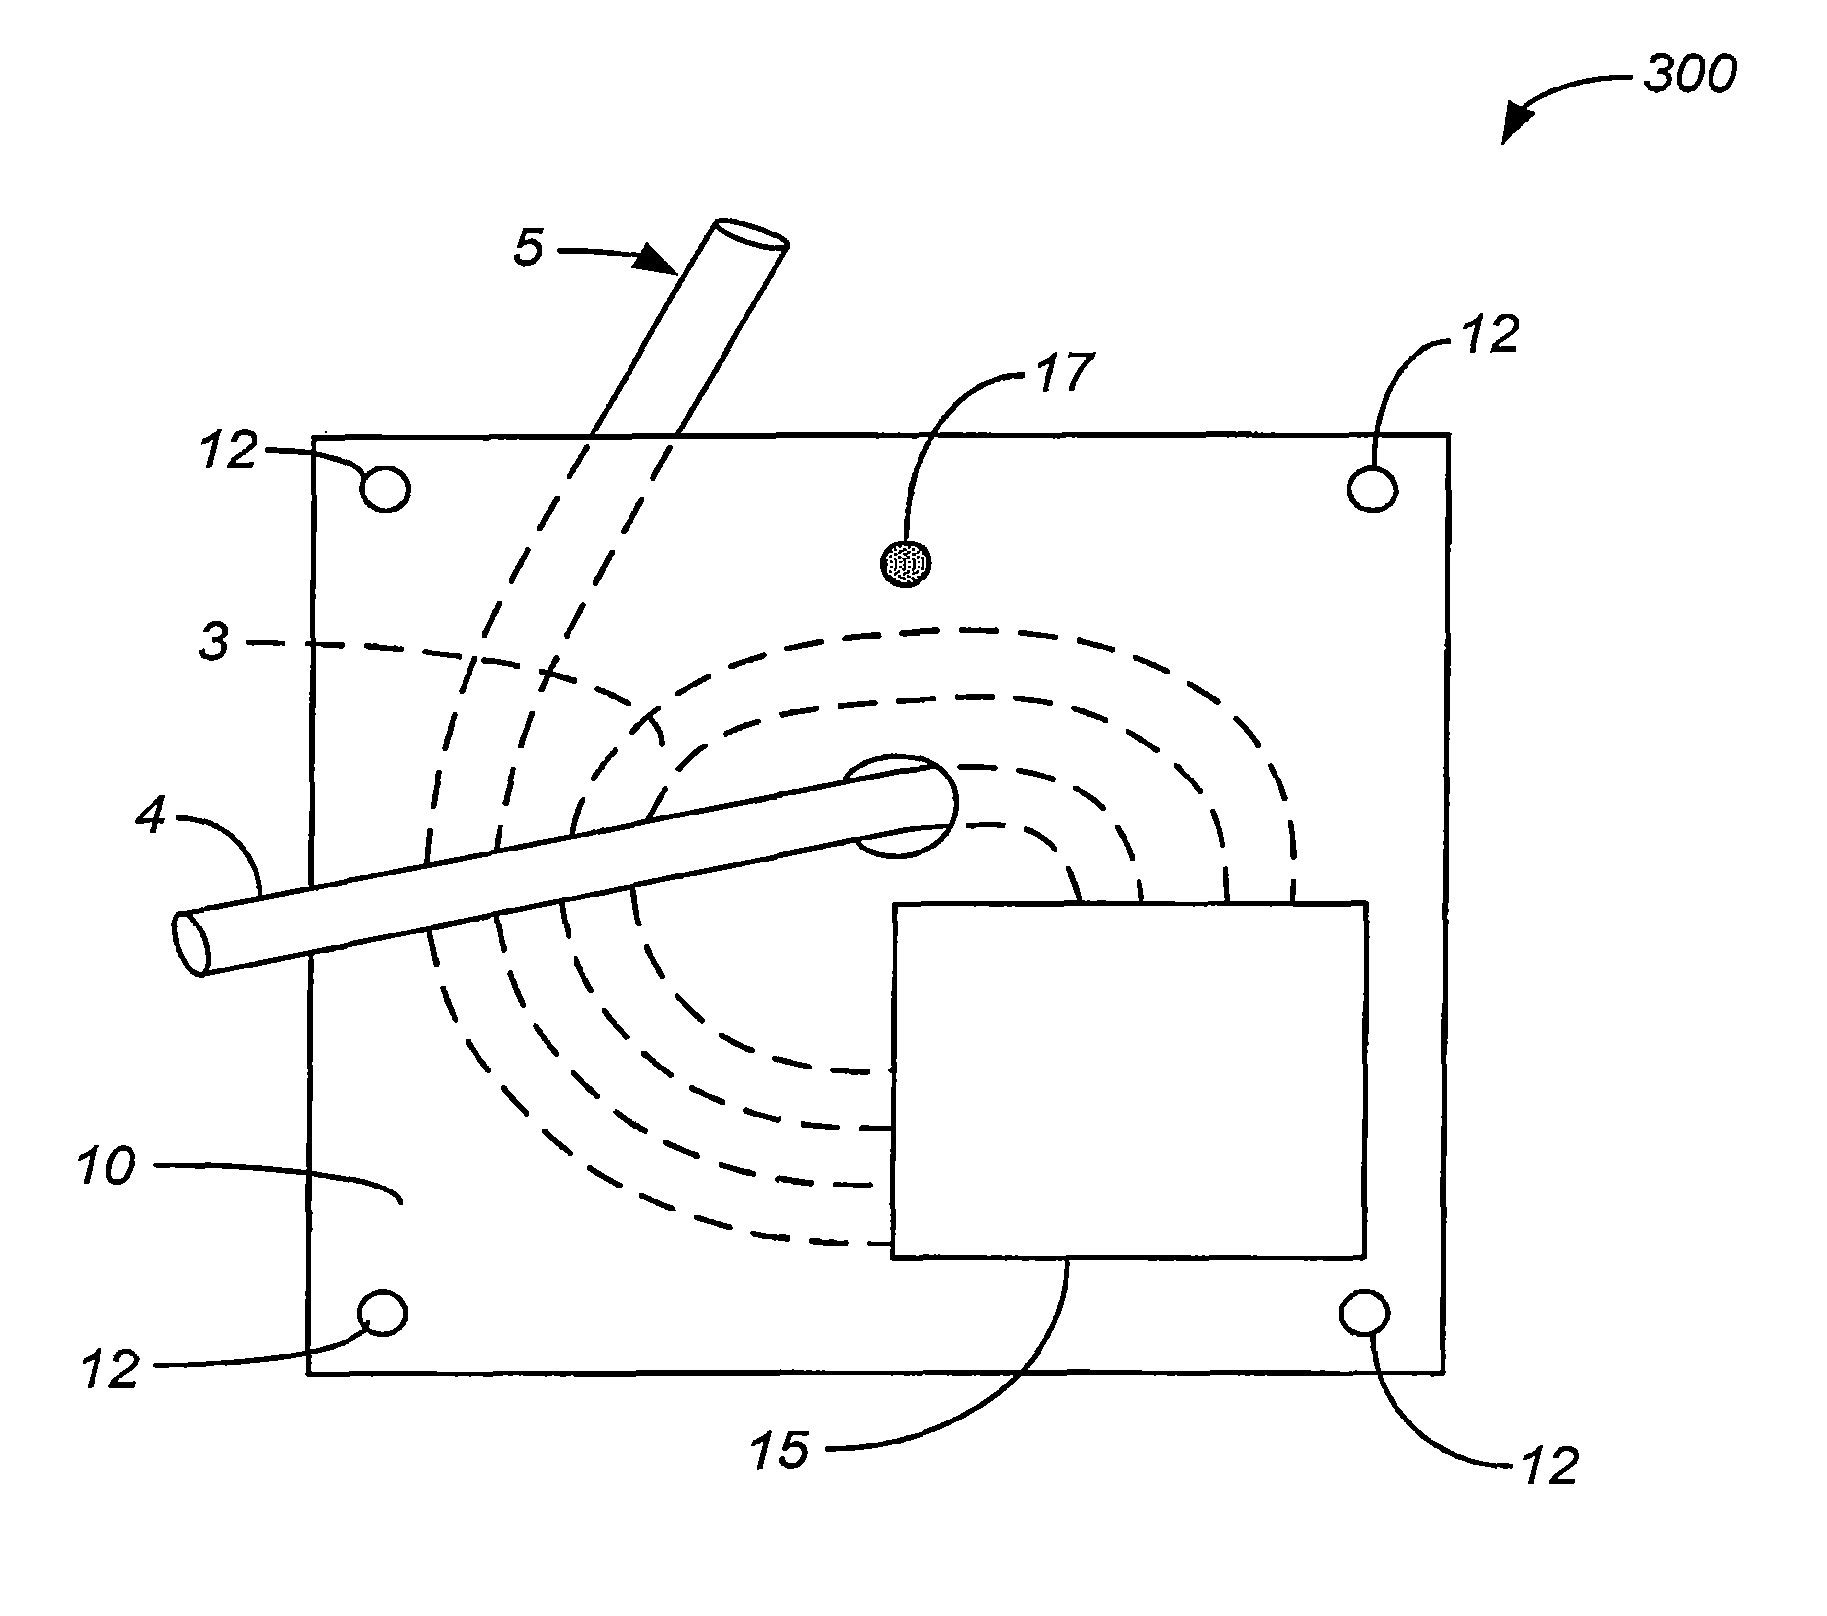 Deformable thermal pads for optical fibers